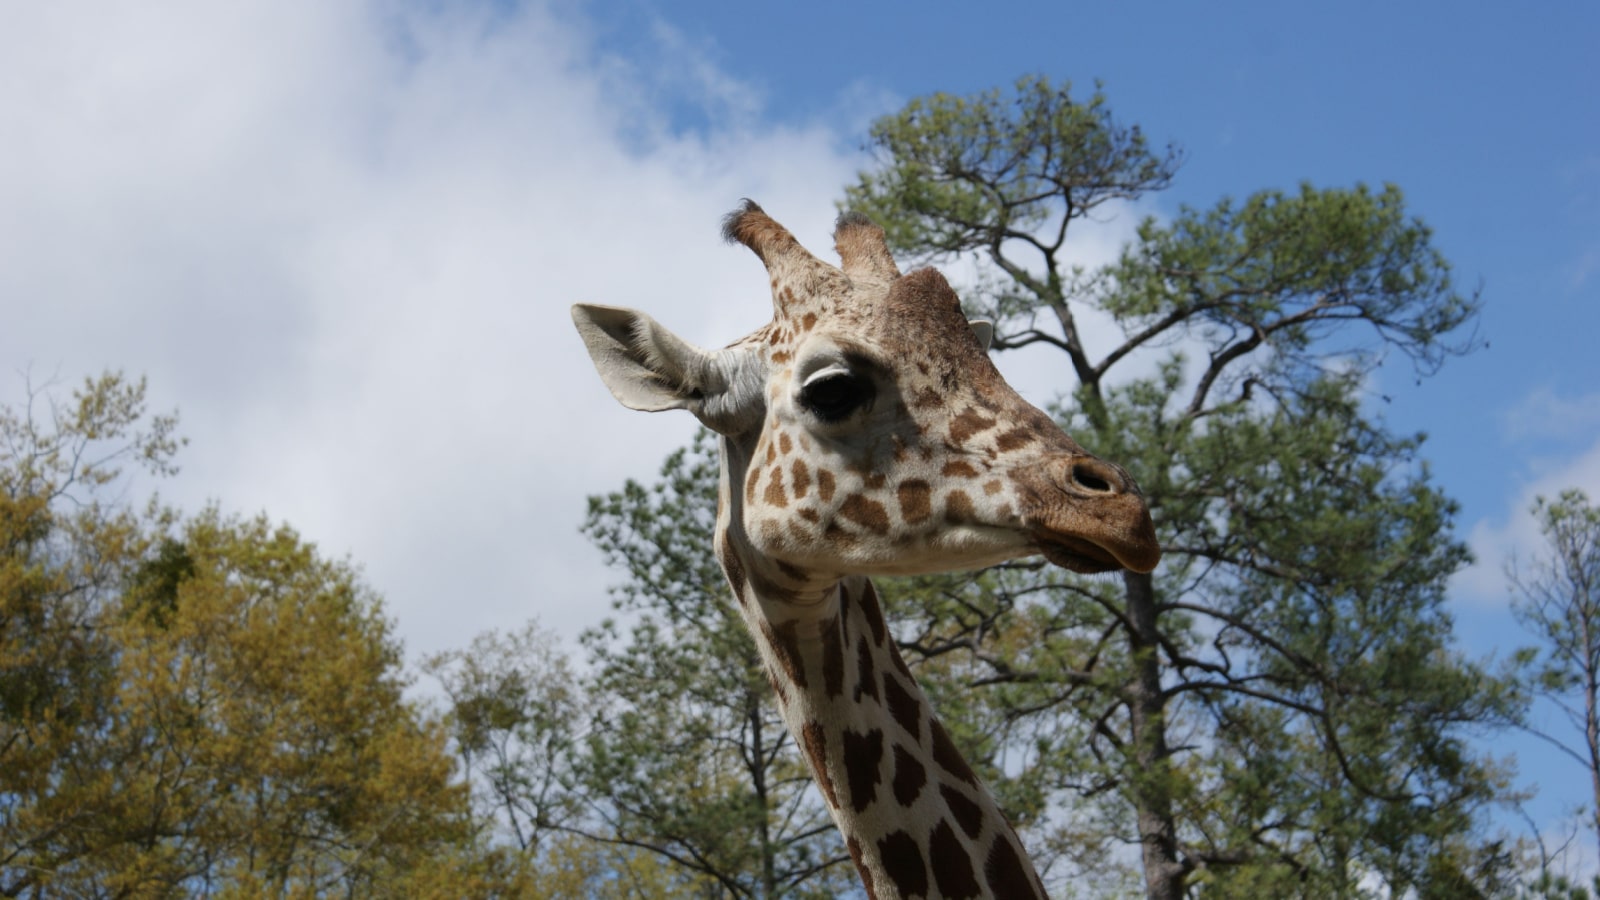 <p>The giraffe hit the top spot when you think of elegance mixed with speed and giant strides. Surprisingly fast for its gait, this strong-feet animal will keep you in awe of nature's brilliance on sight.</p>